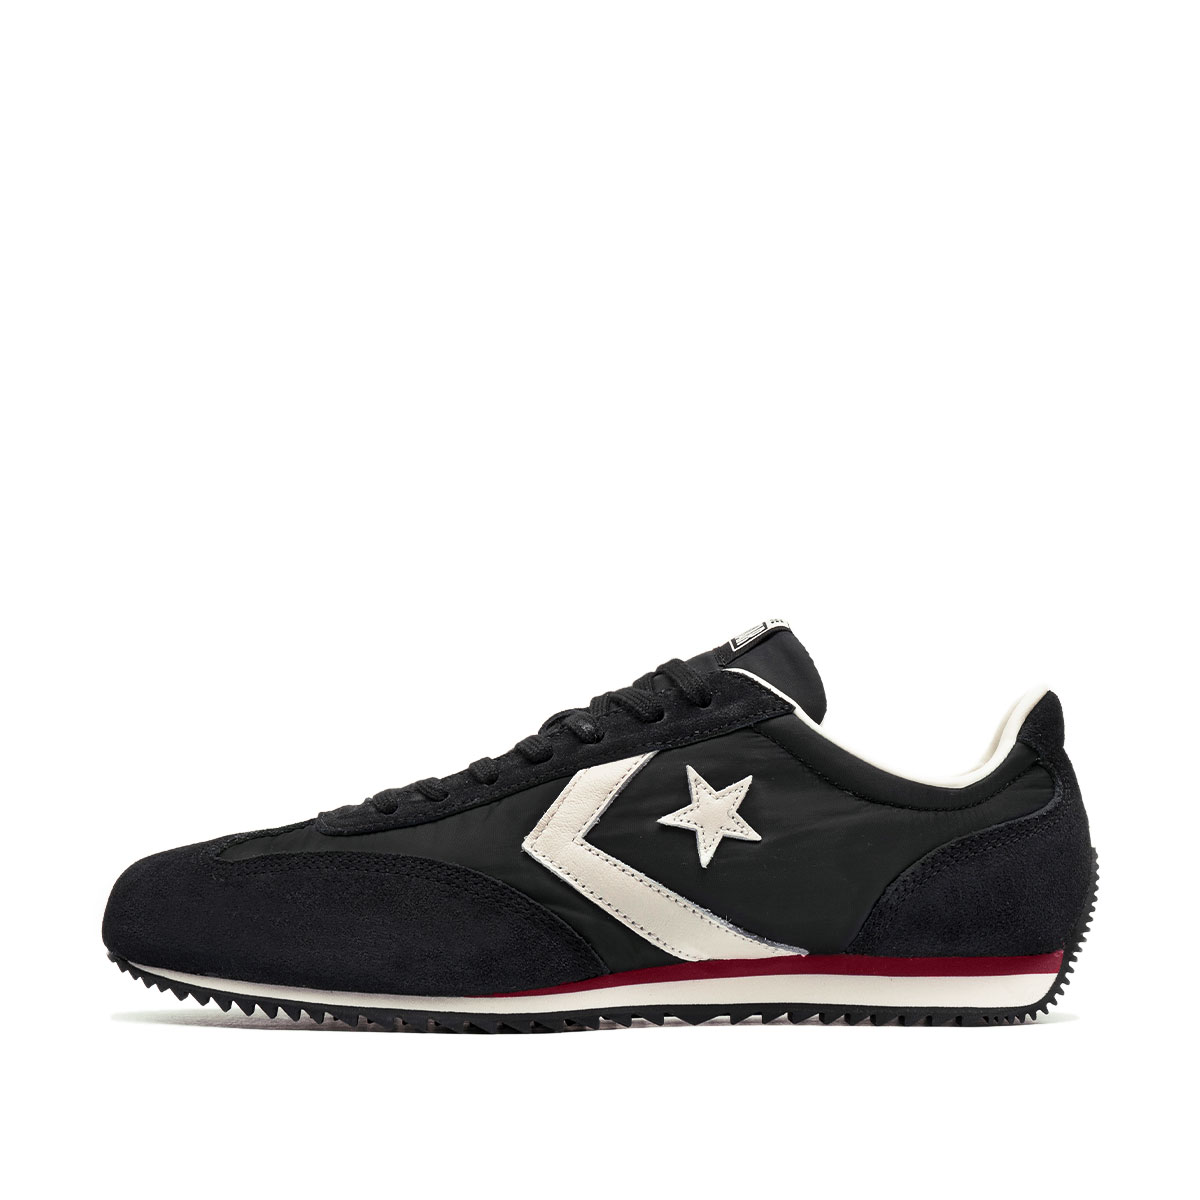 Converse All Star Trainer OX  161230C